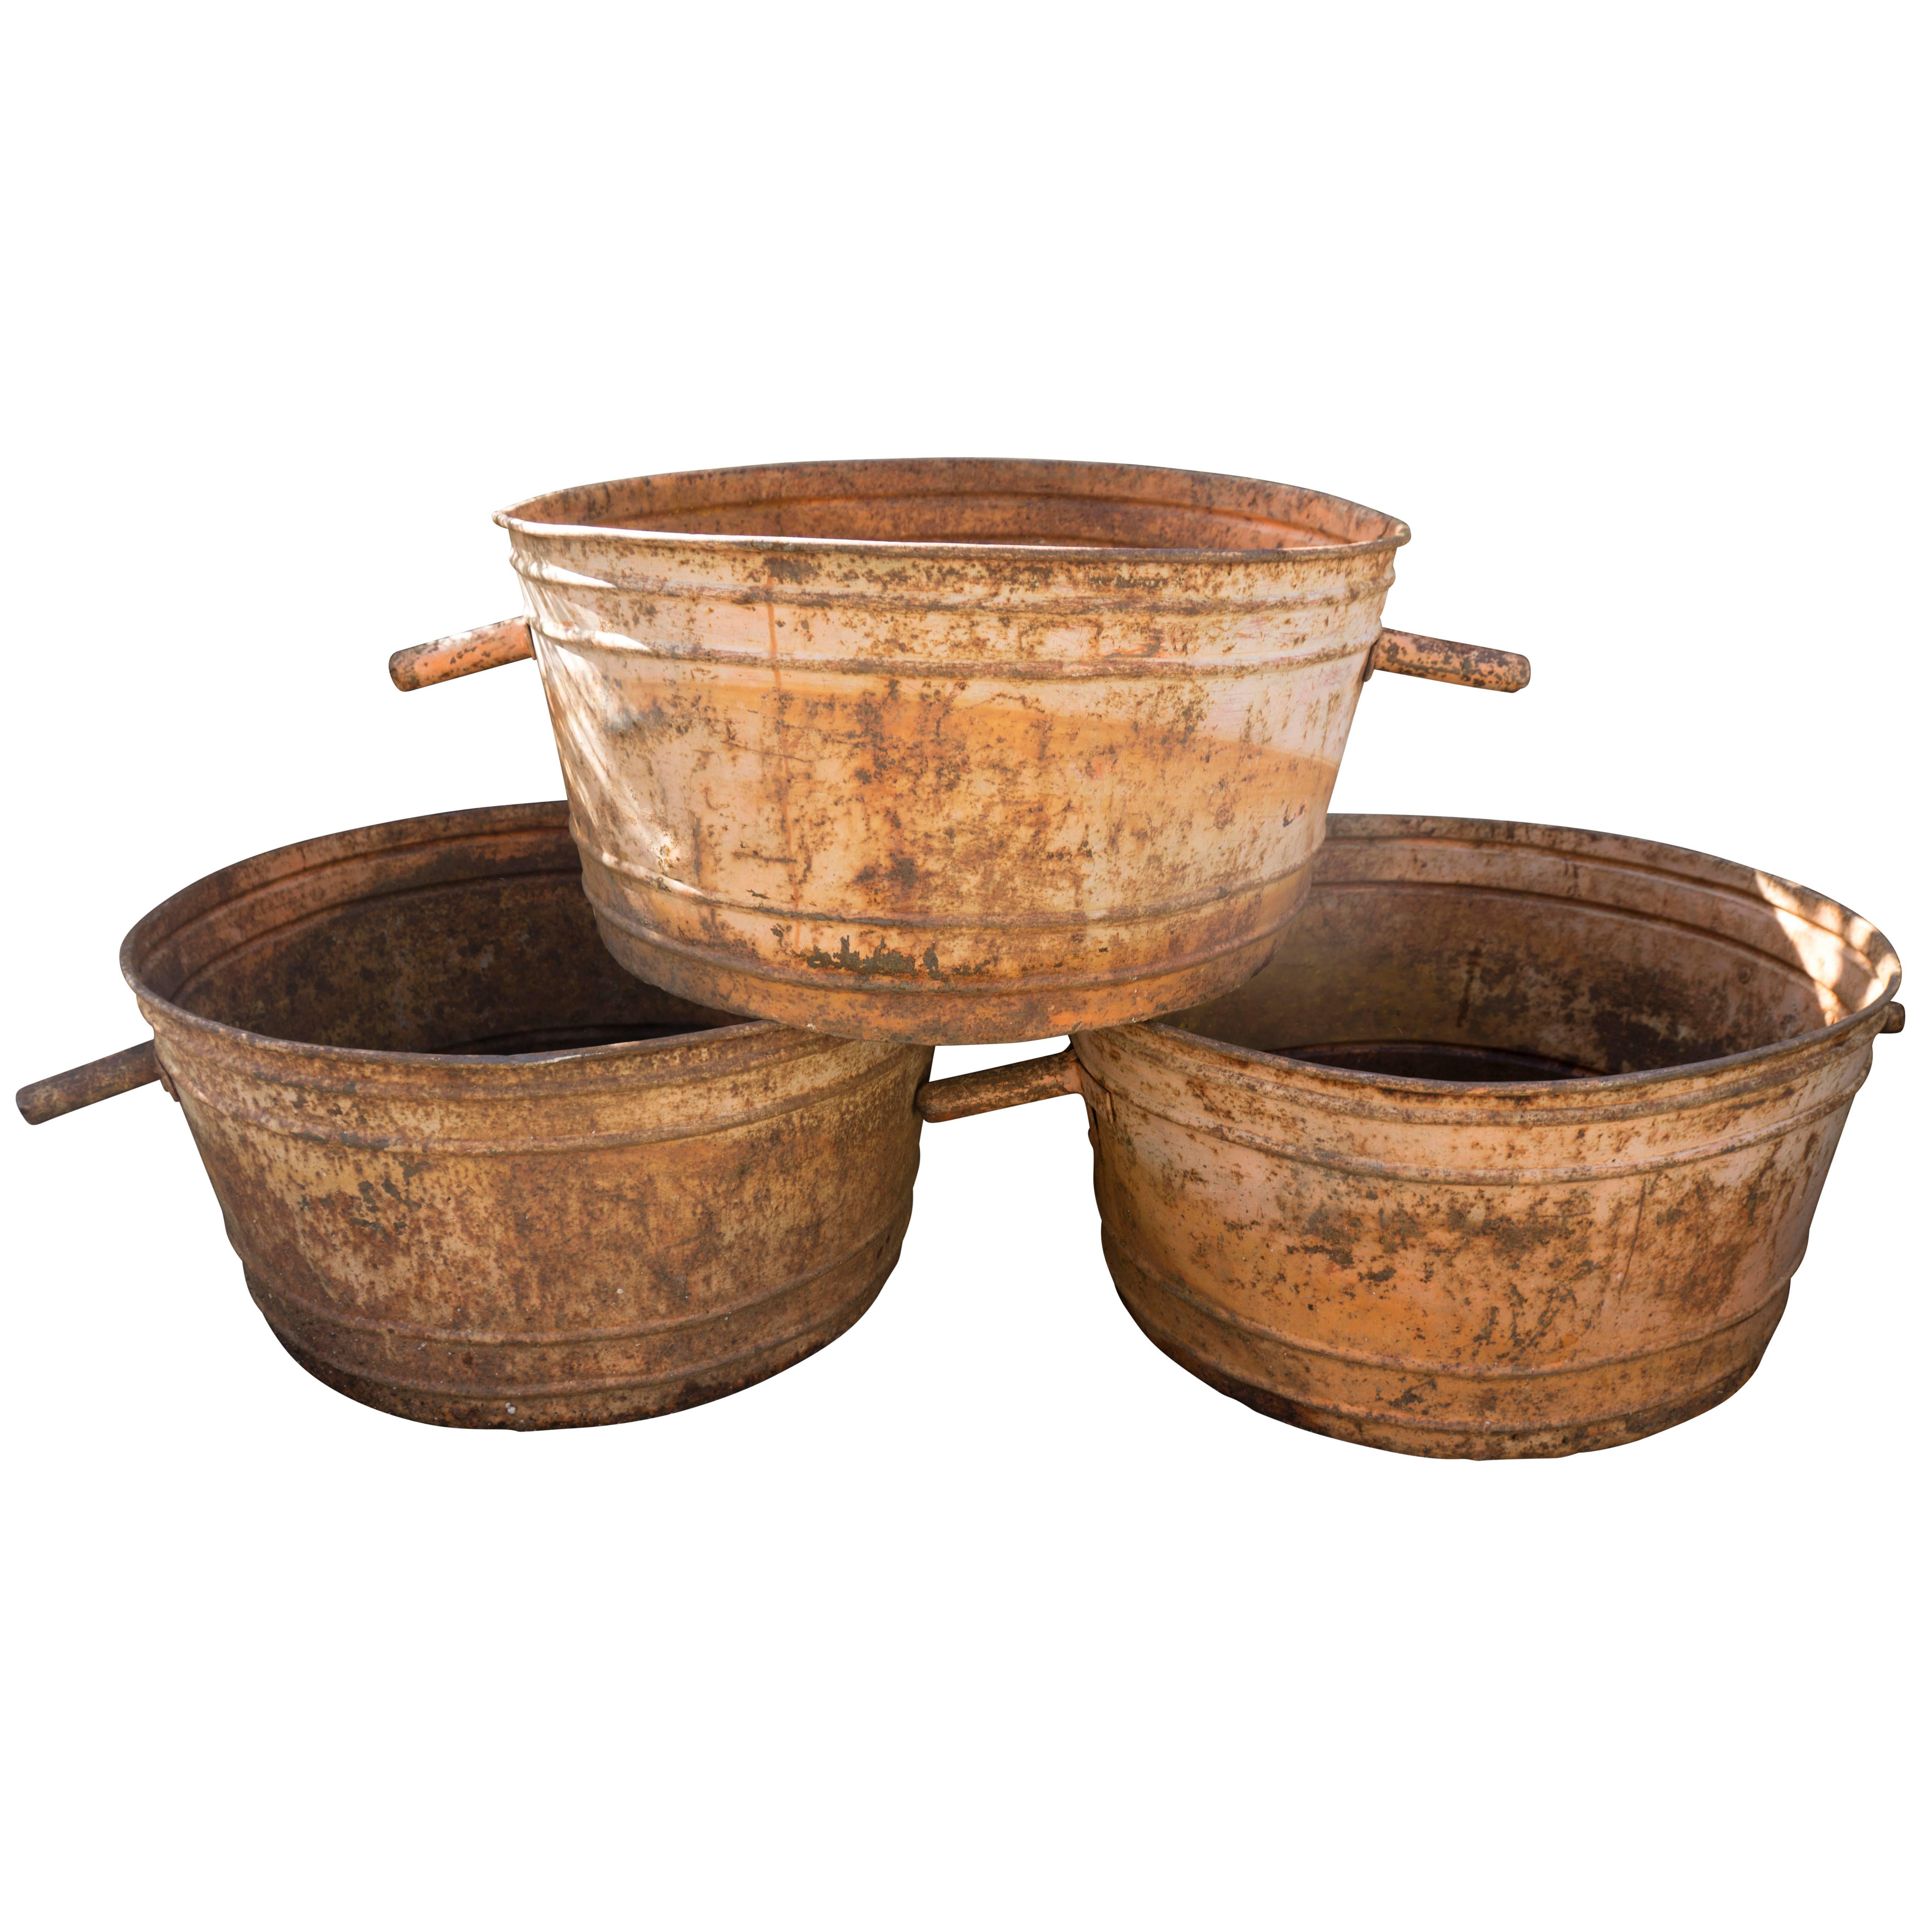 Available individually or in a set of up to three while in stock. These copper tubs make excellent use as planters. Appearing slightly dented and misshapen with orange rust patina along with unique small handles. These copper tubs incredibly